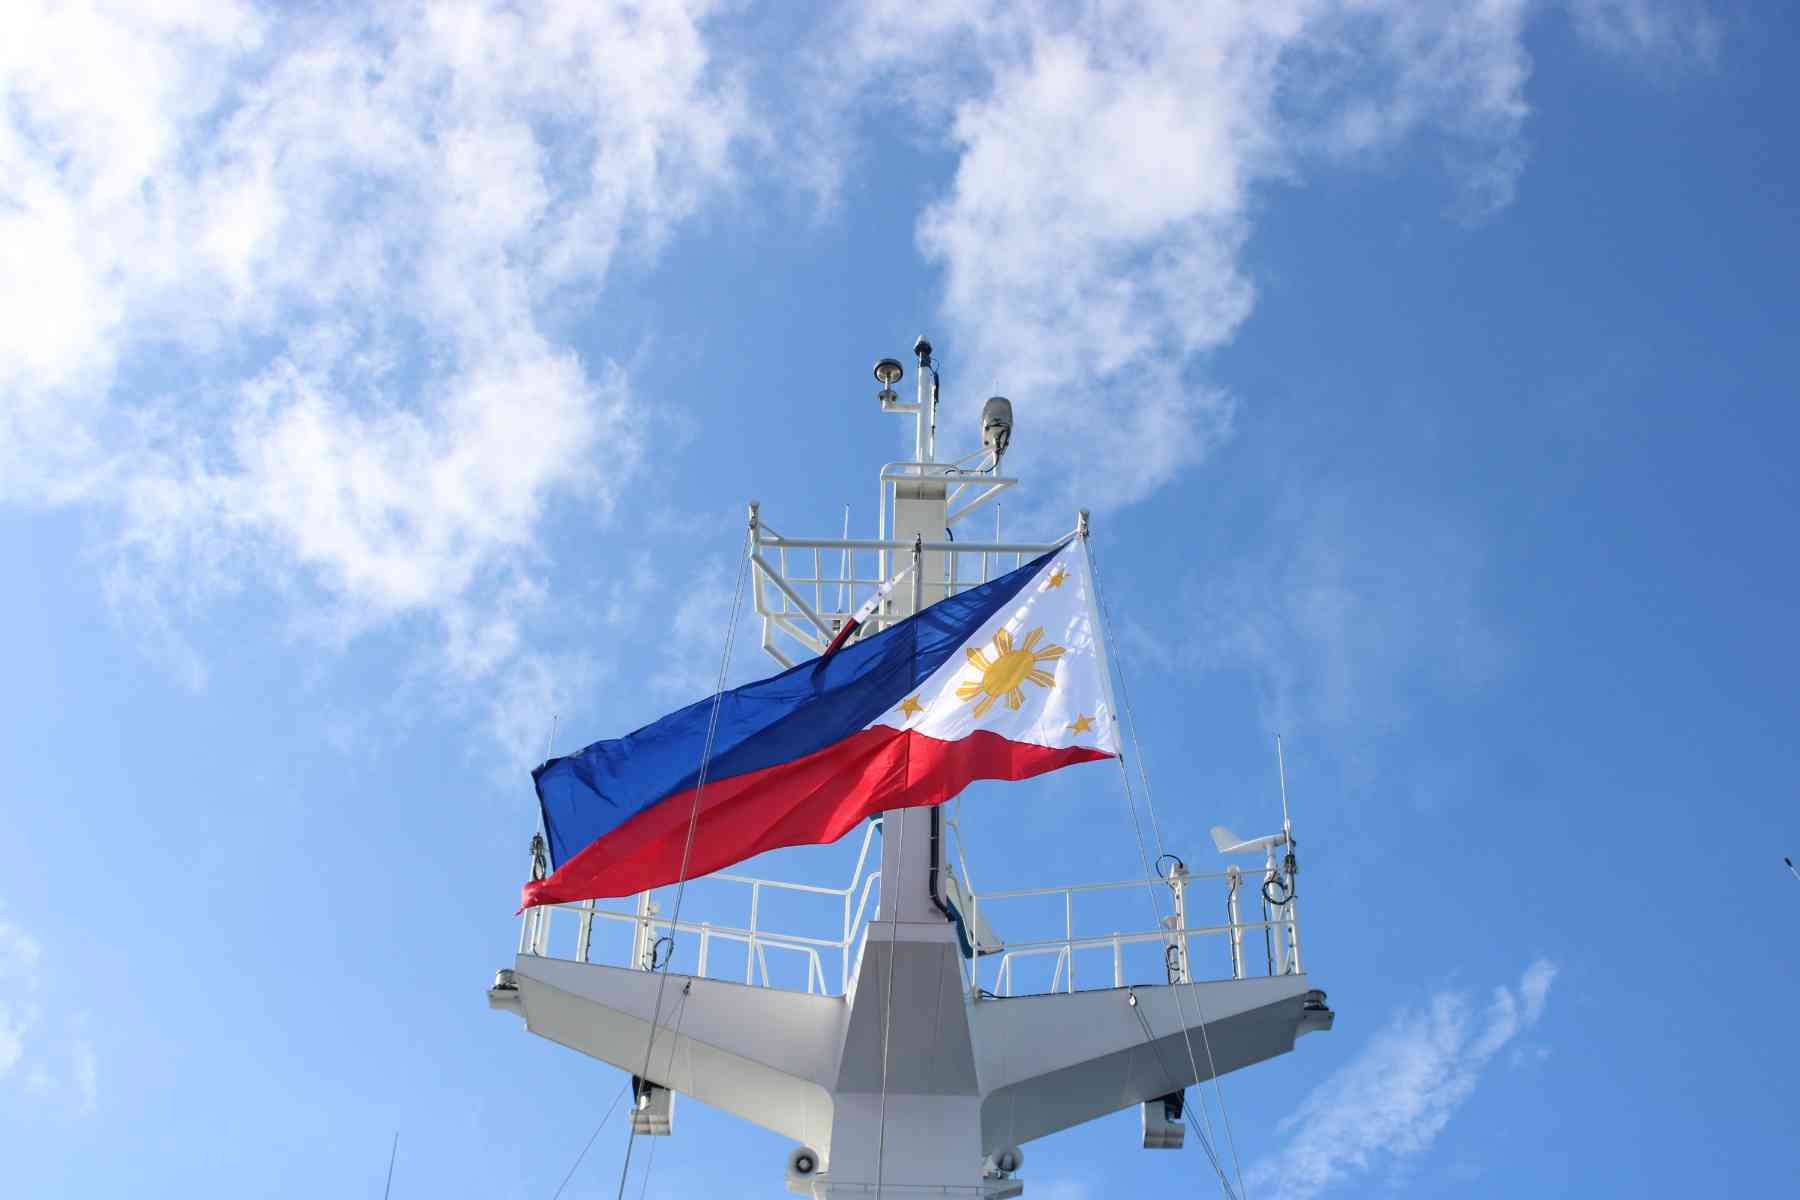 AFP on China's latest allegation in SCS: 'Deceptive, misleading'